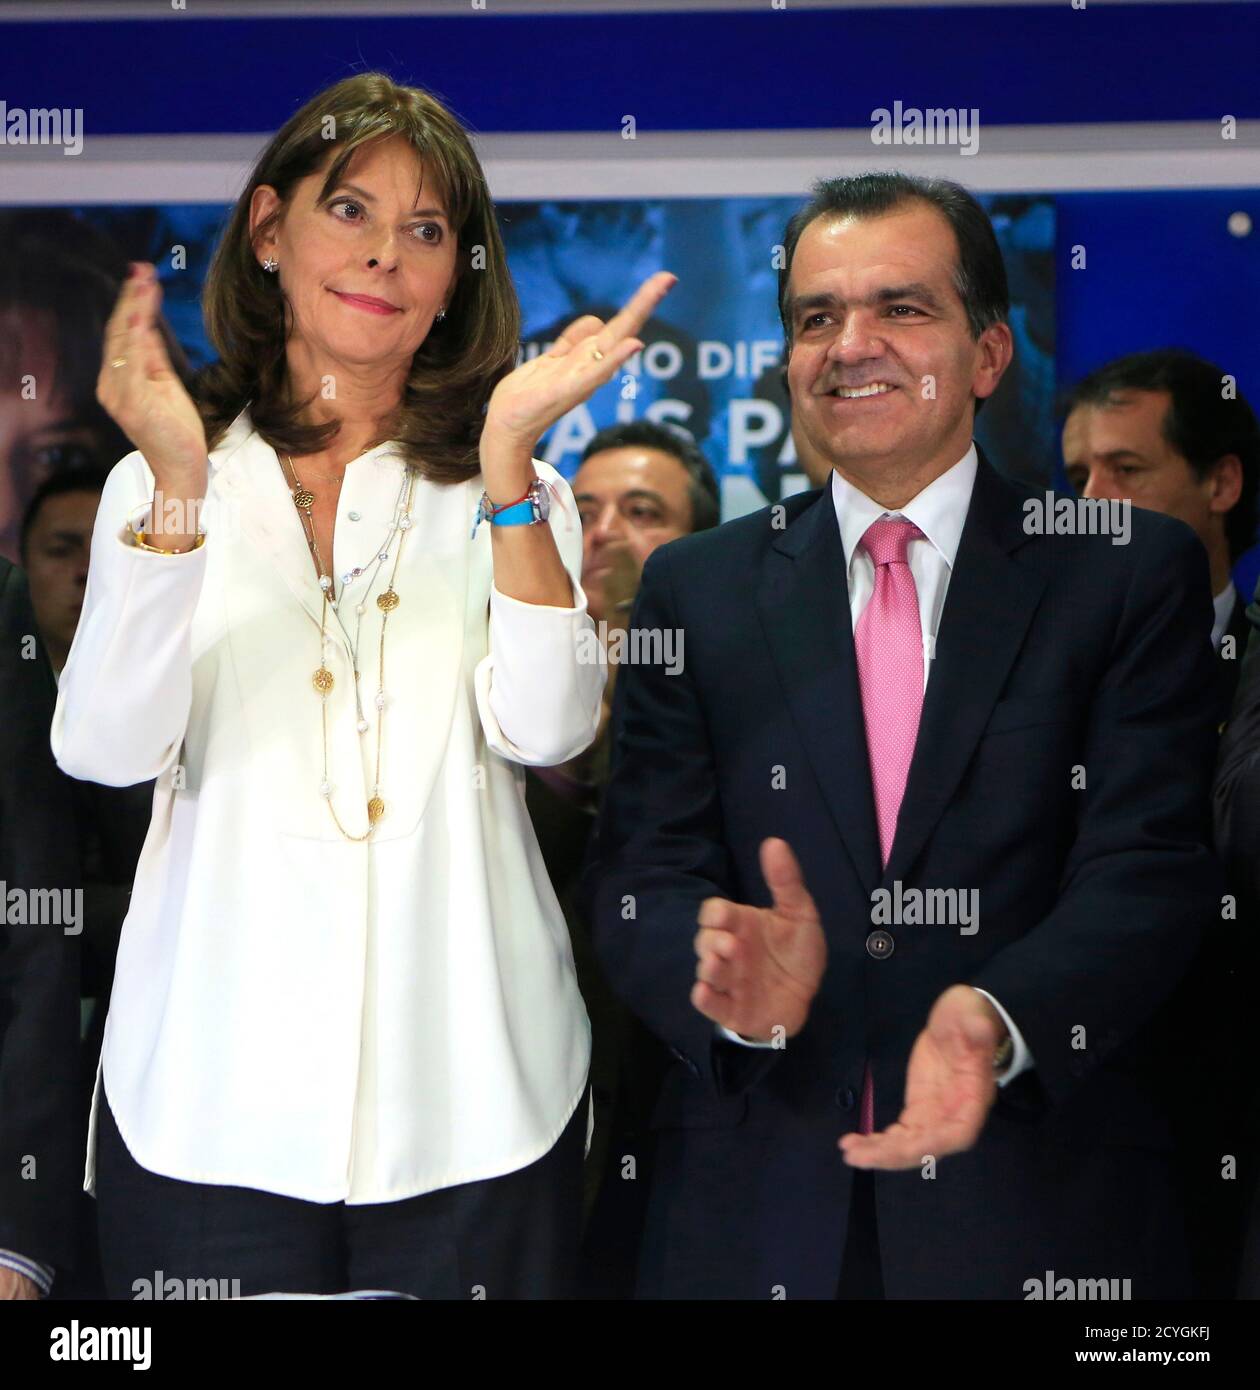 Presidential candidate Oscar Ivan Zuluaga (R) and former candidate Marta Lucia  Ramirez clap during an event in Bogota May 28, 2014. Ramirez, who came  third in Colombia's presidential election on Sunday, threw